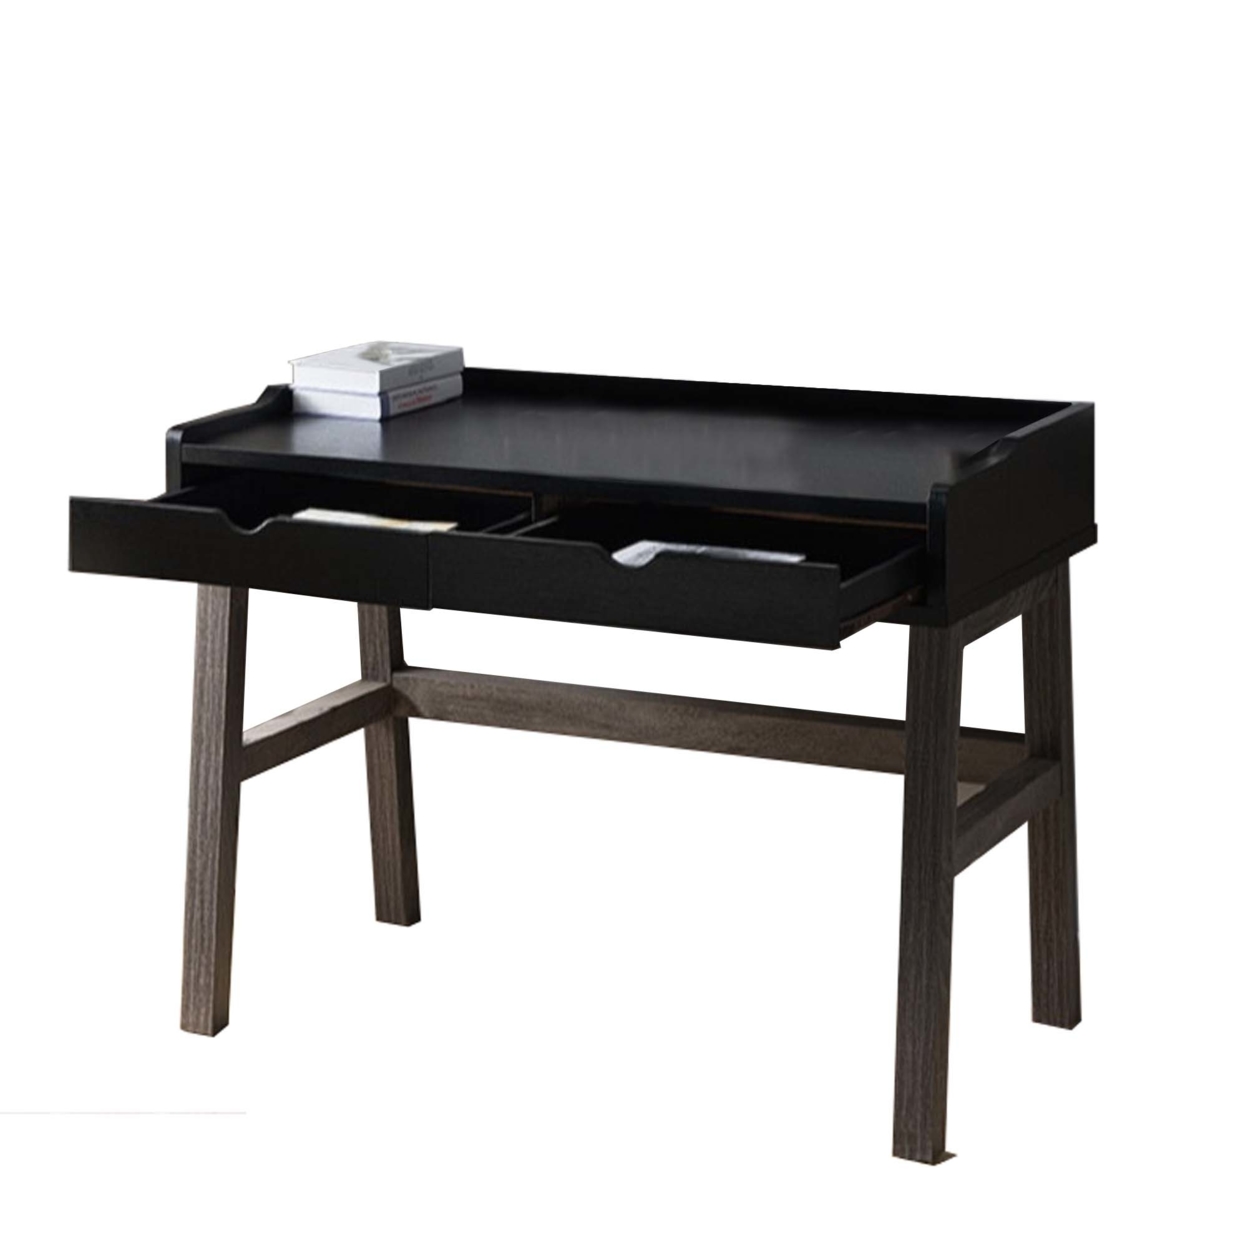 Dual Toned Wooden Desk With Two Sleek Drawers And Slightly Splayed Legs, Gray And Black- Saltoro Sherpi